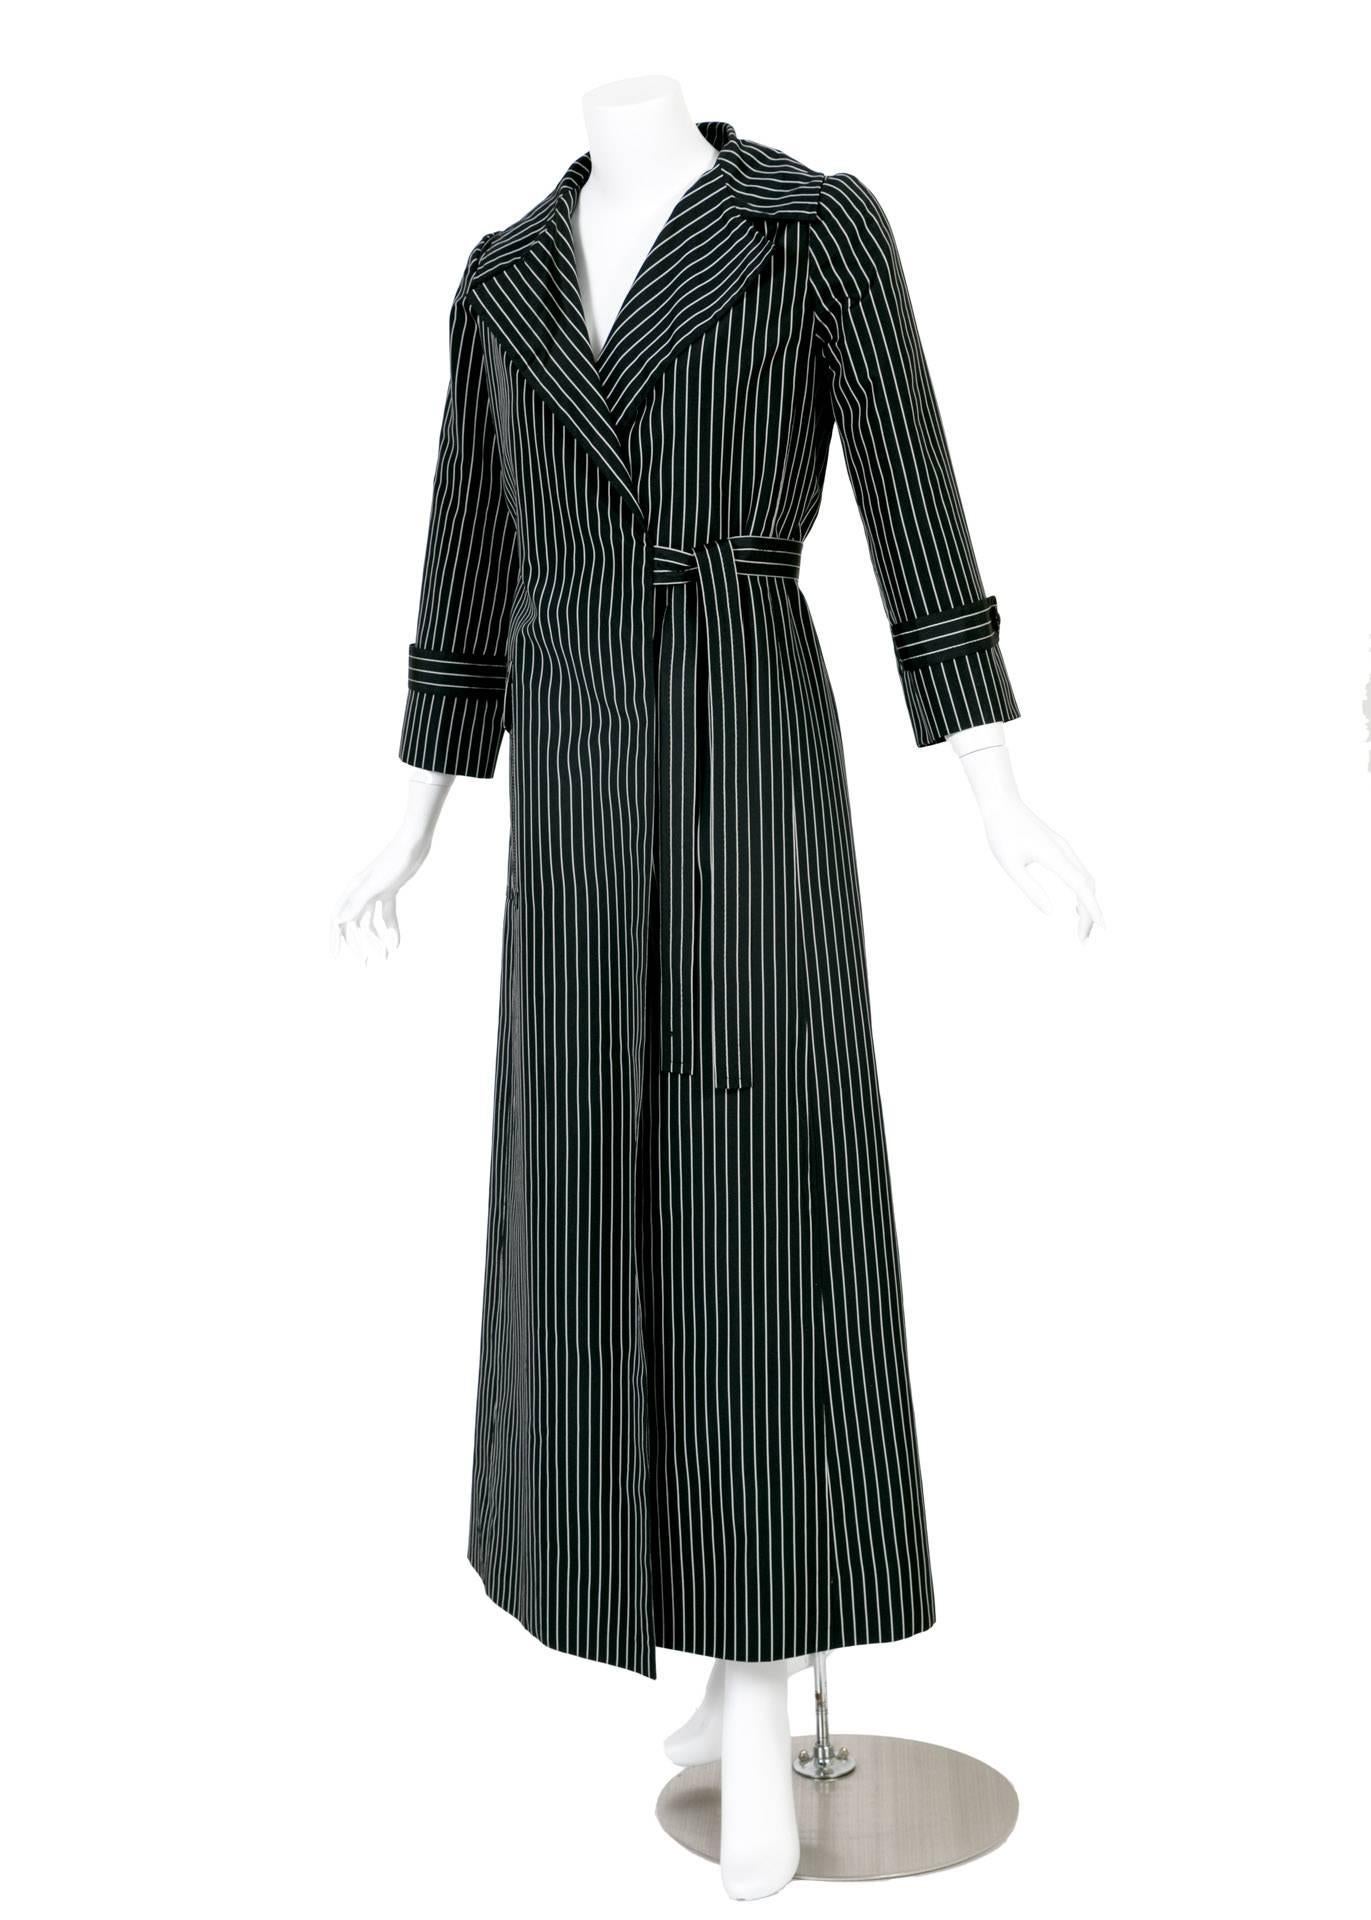 Lagerfeld’s early work for Tiziani Roma caught the eye of many notable women, including superstar Elizabeth Taylor. This 1960s-era pinstriped taffeta coat embodies the drama and style of both Hollywood and Lagerfeld. With hints of film noir, its